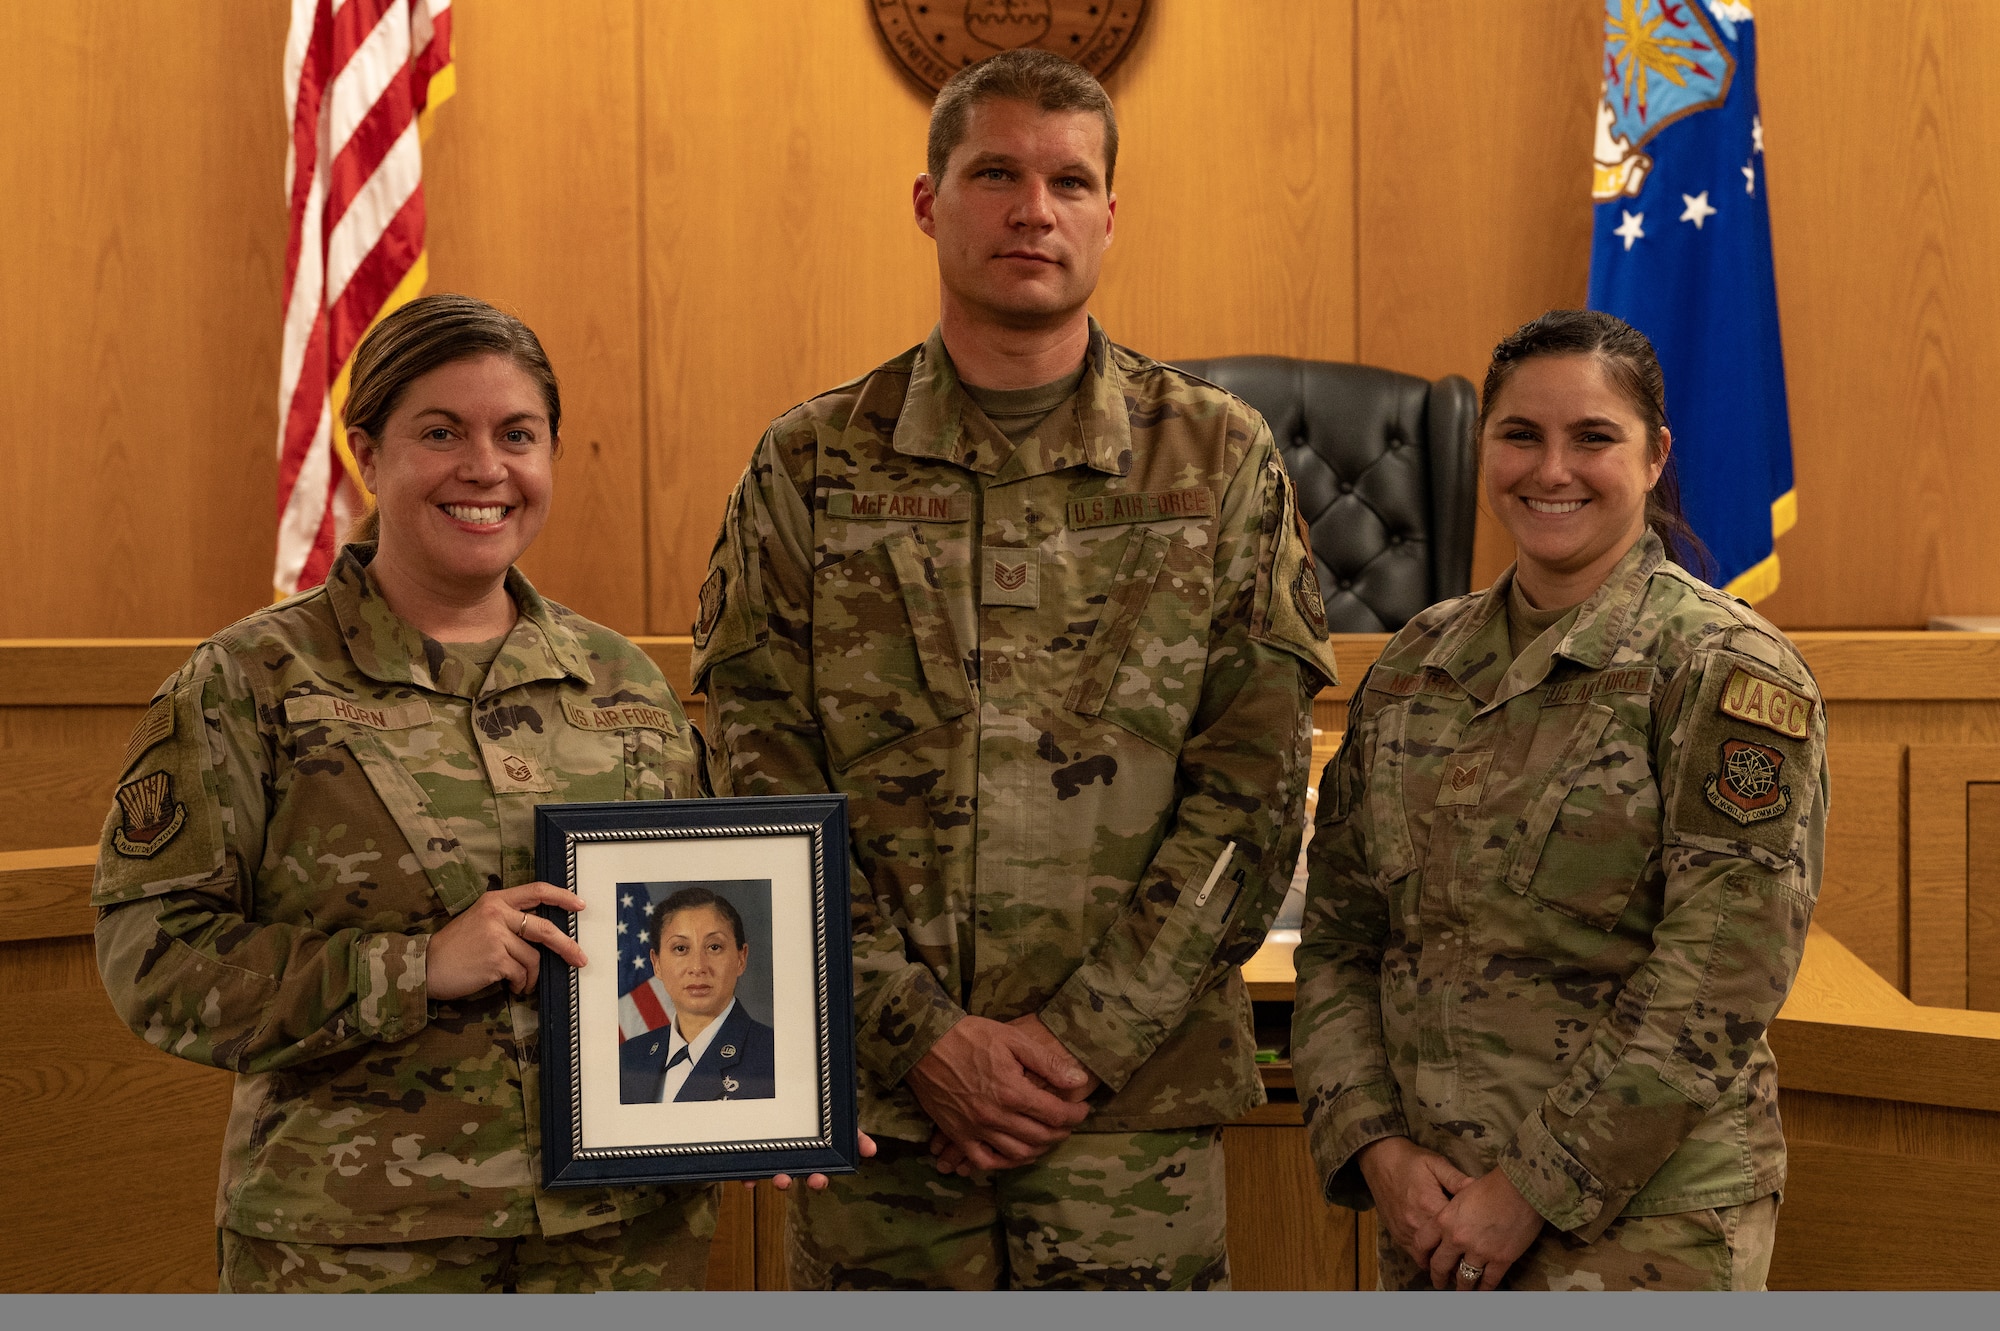 From left U.S. Air Force Master Sgt. April Horn, the 6 ARW law office superintendent, U.S. Air Force Technical Sgt. Shawn McFarlin, the non-commissioned officer in charge of 6 ARW legal team, and U.S. Air Force Technical Sgt. Lizandra Montero, 6 ARW Paralegal, pose for a photo at MacDill Air Force Base, Florida, Mar 3, 2023.